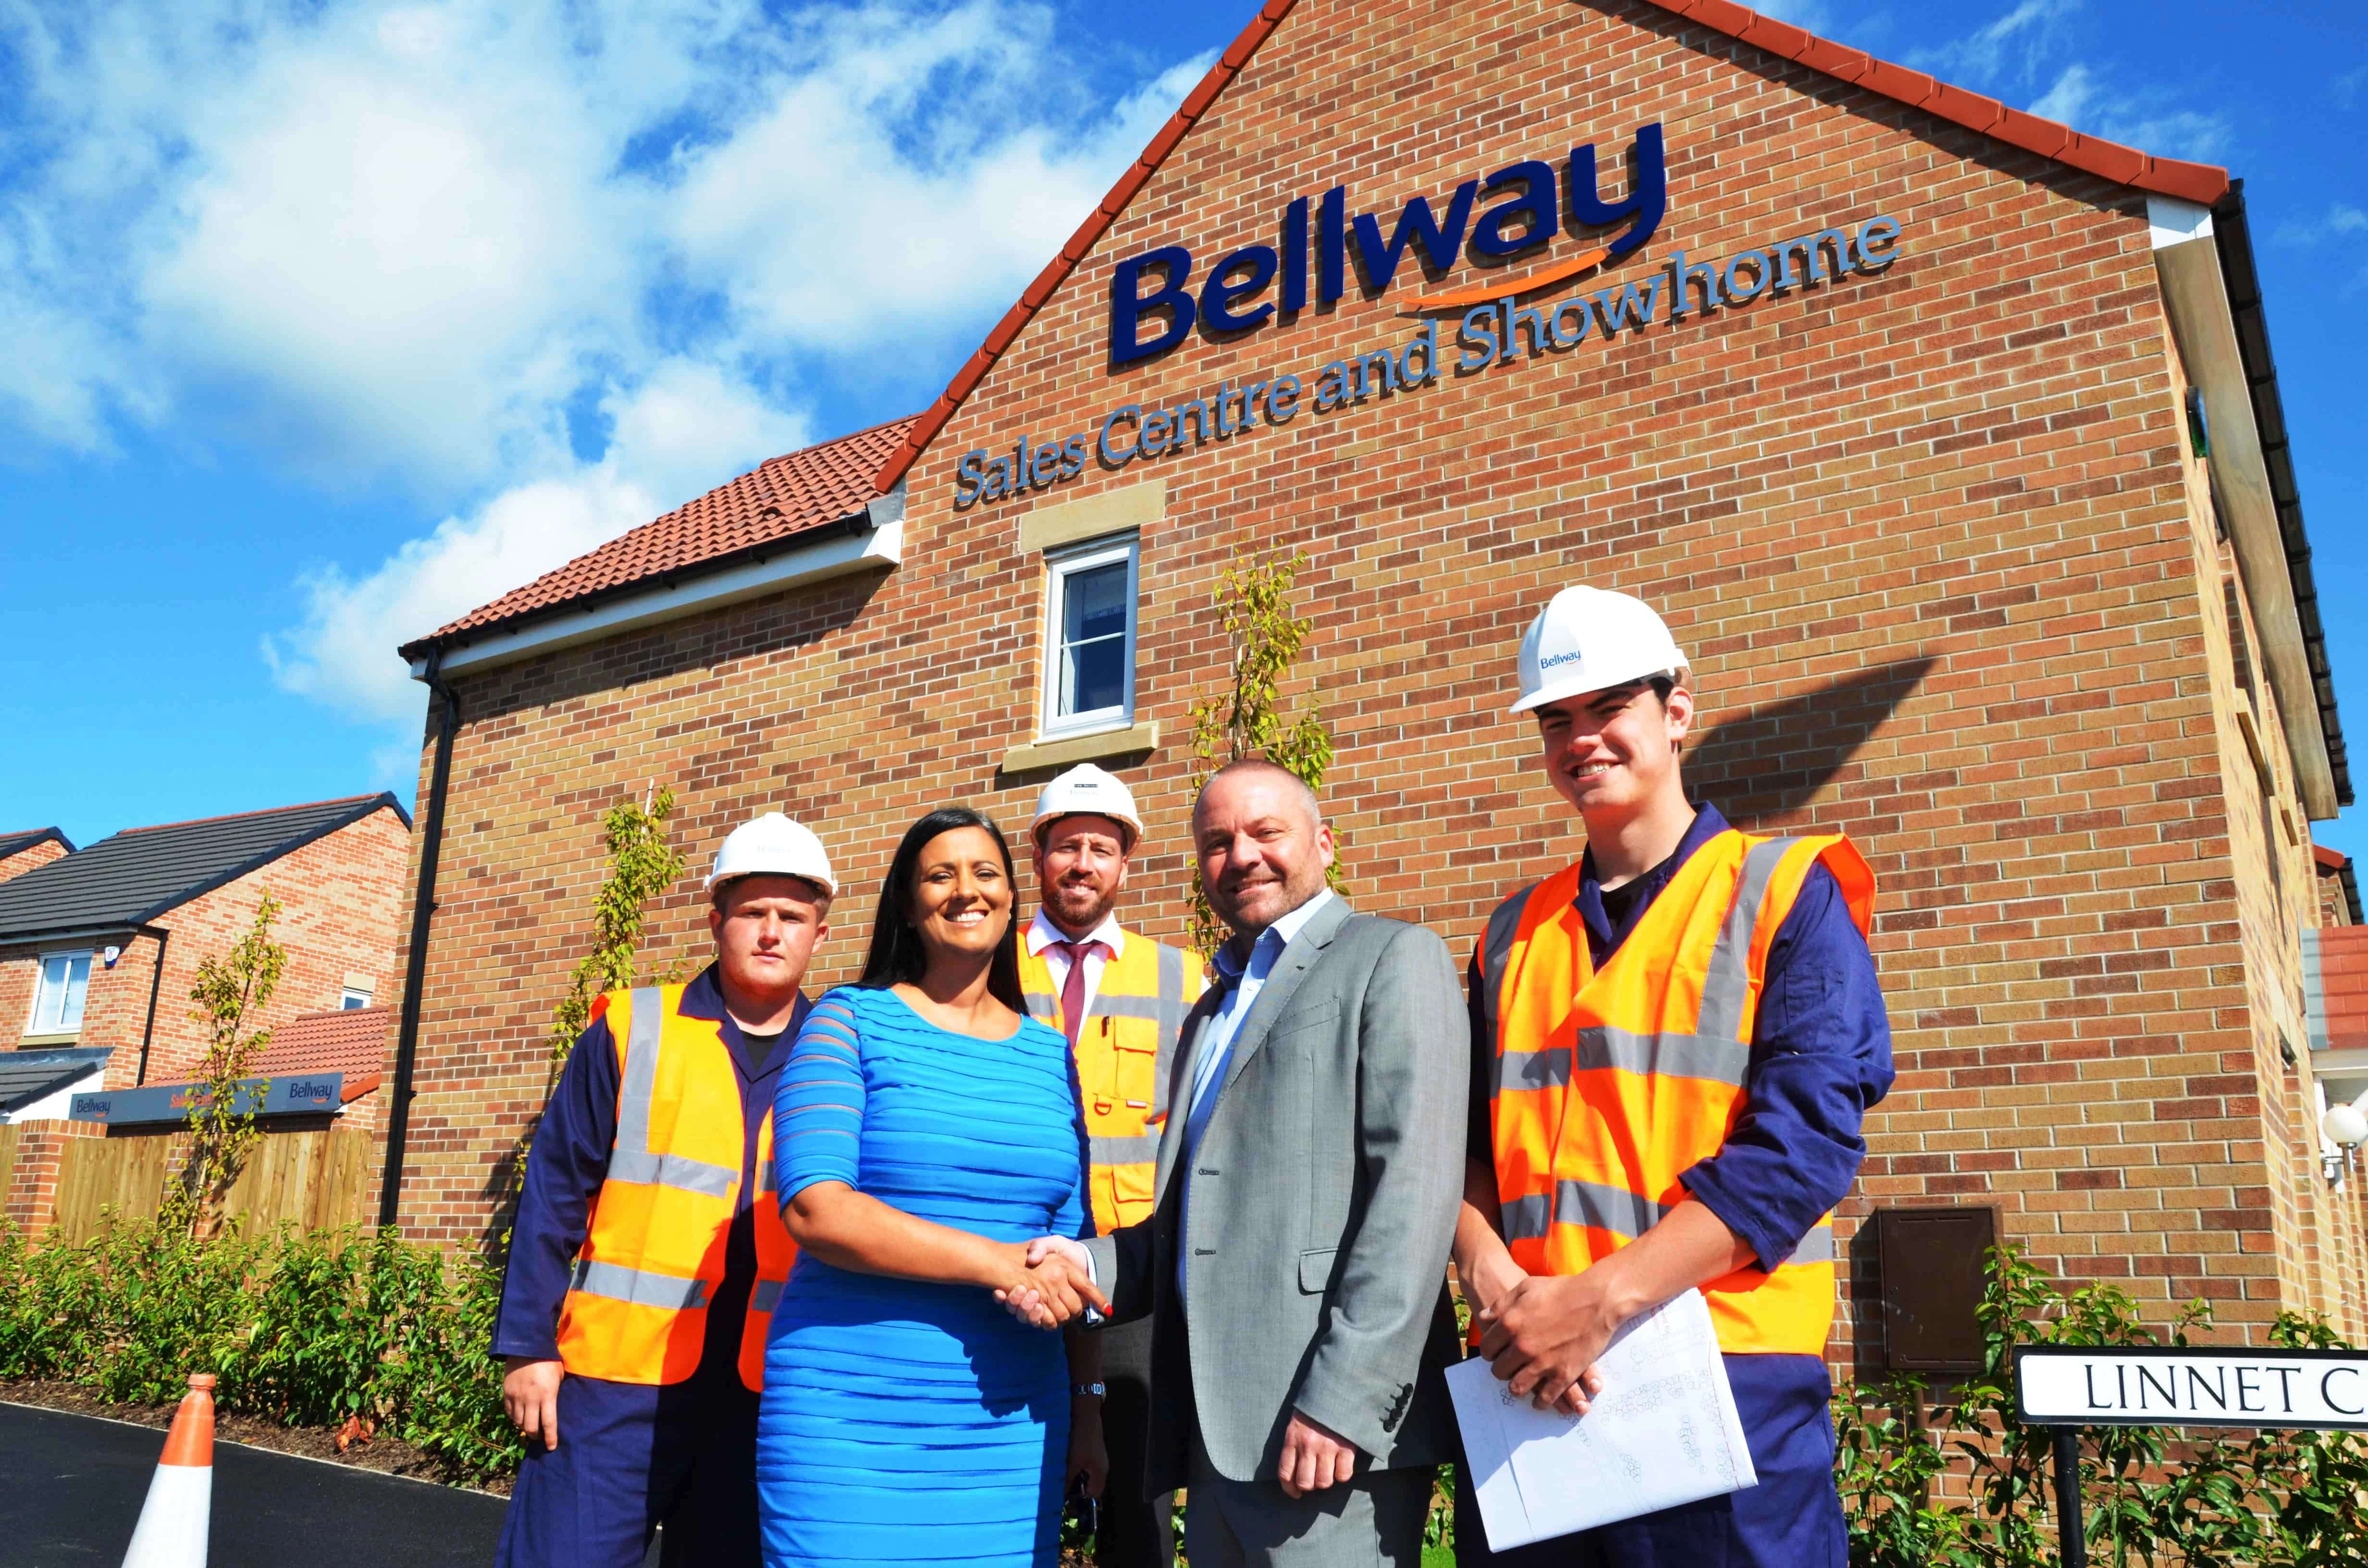 Brenda McLeish, Learning Curve Group CEO and Jon Horan, Bellway plc Construction Director meet apprentices on site